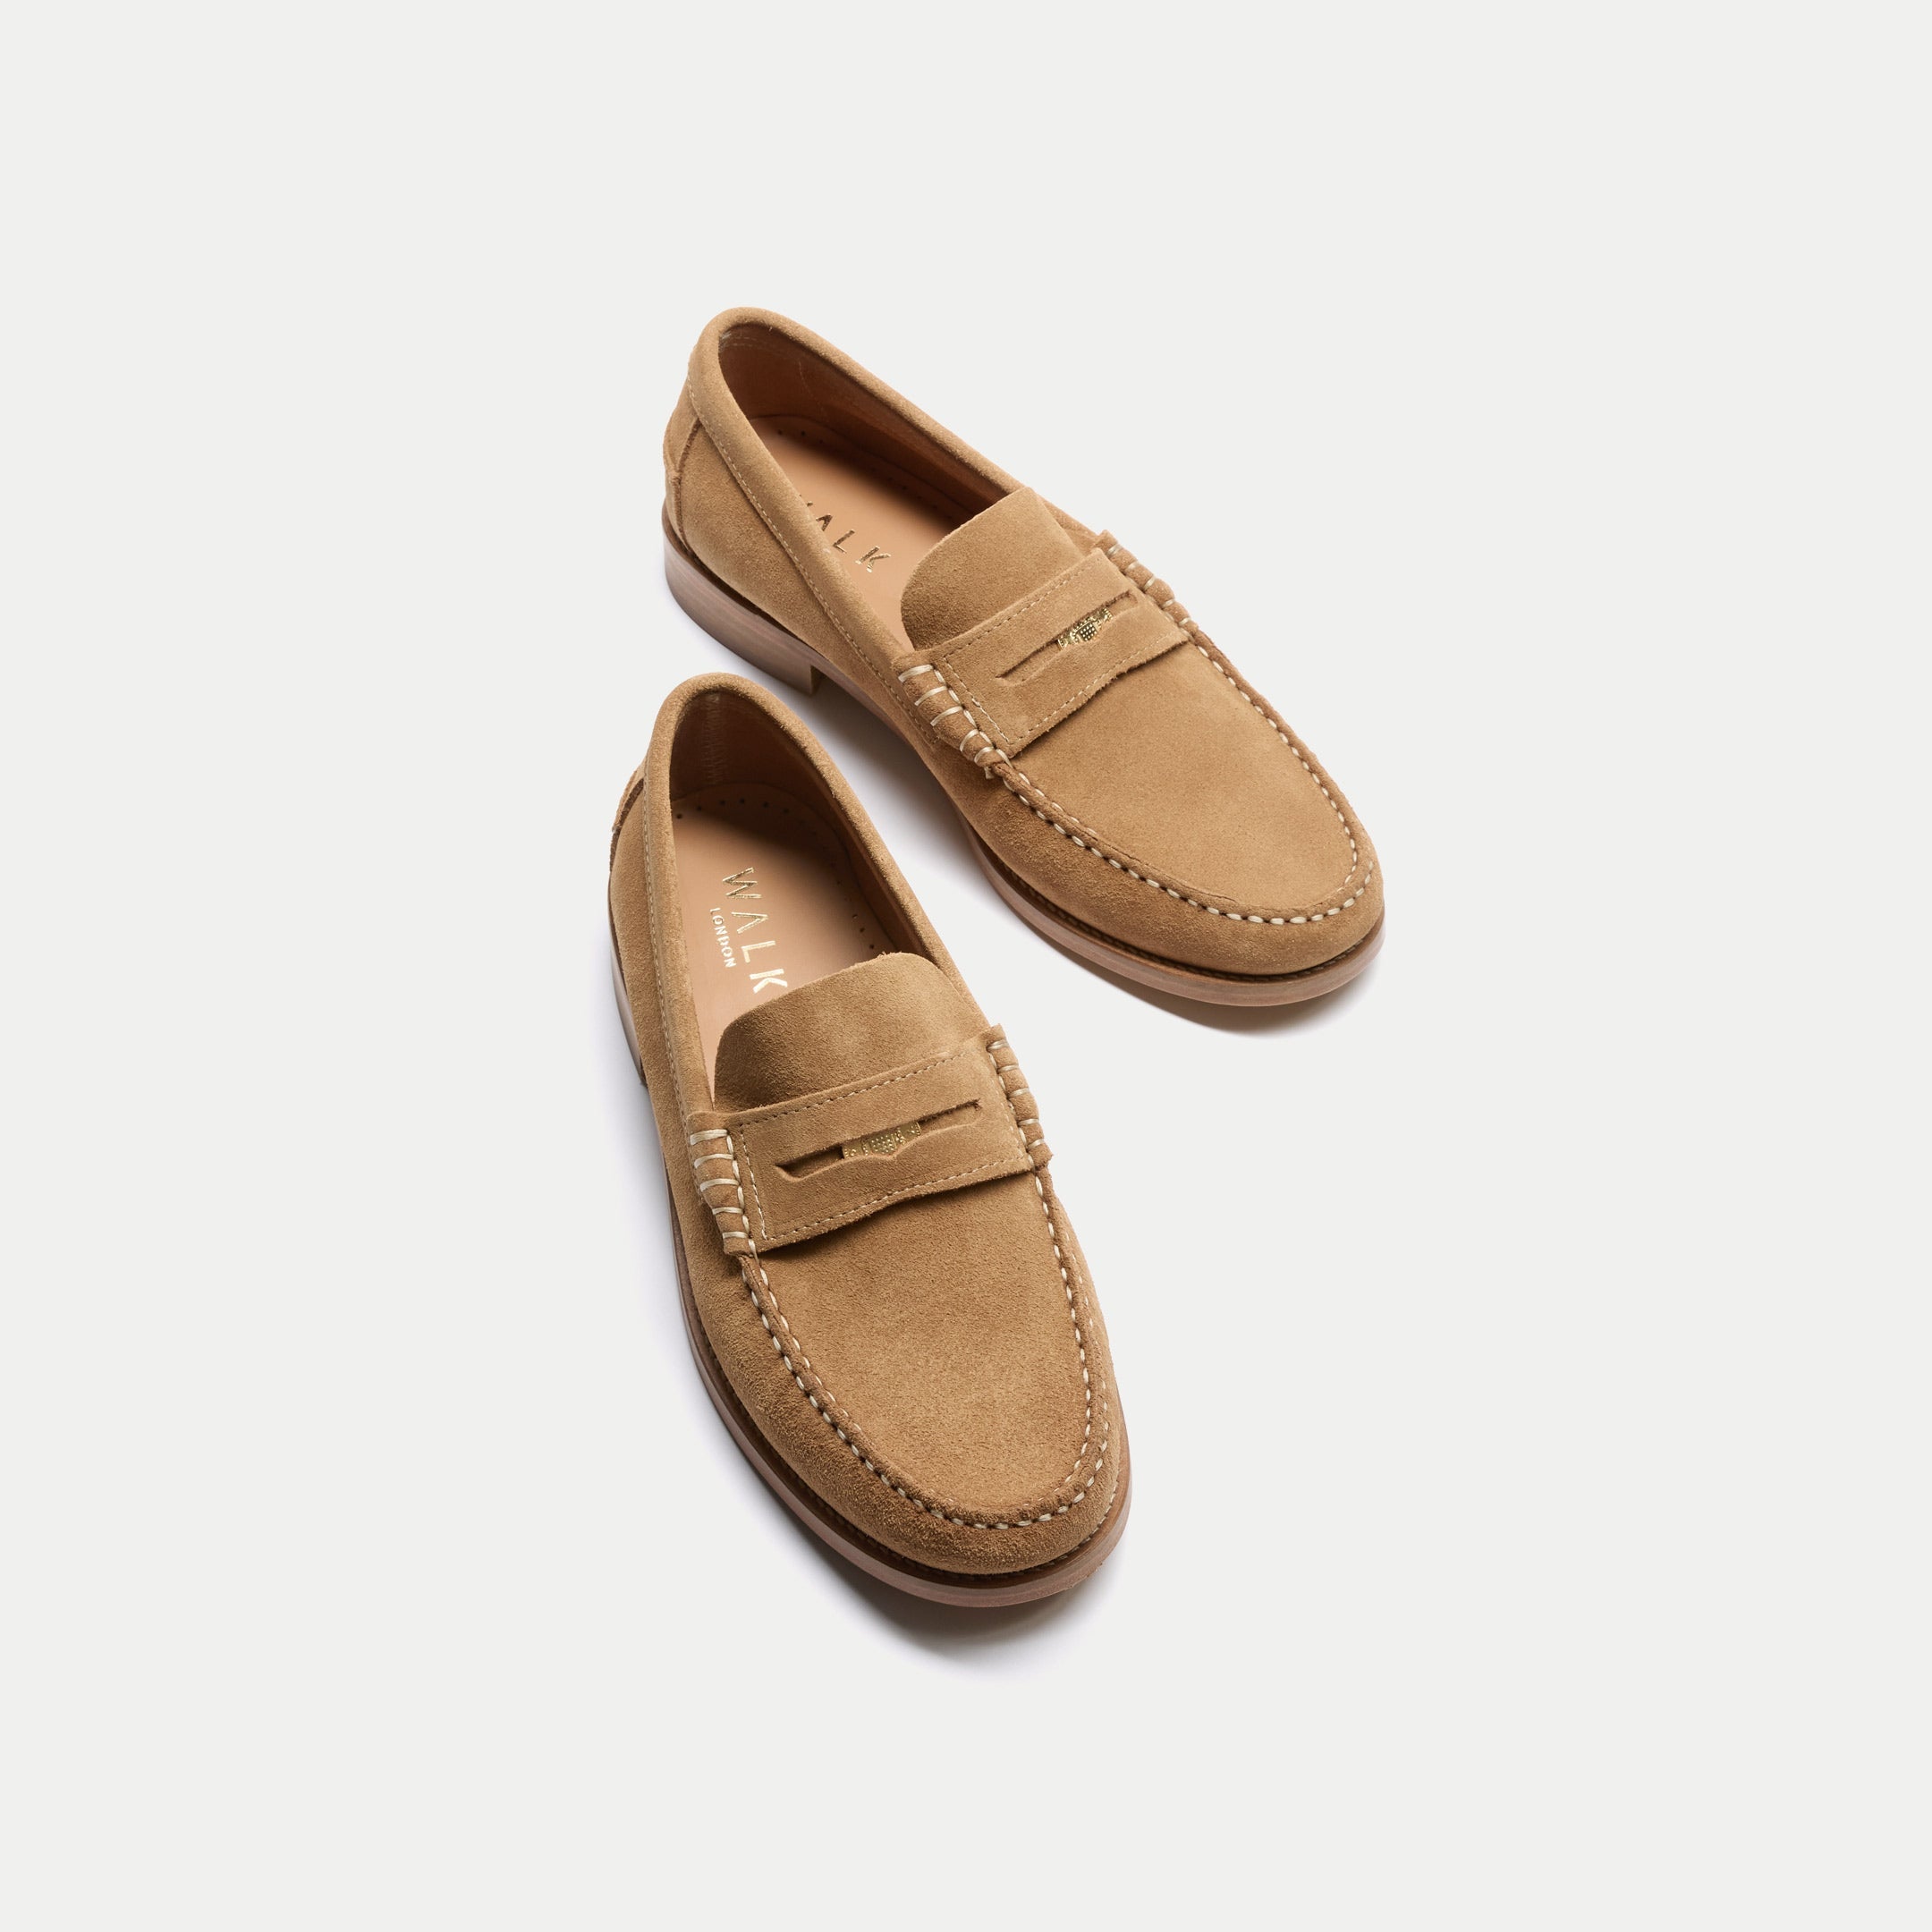 Walk London Mens Dalston Penny Loafer in Tan Suede